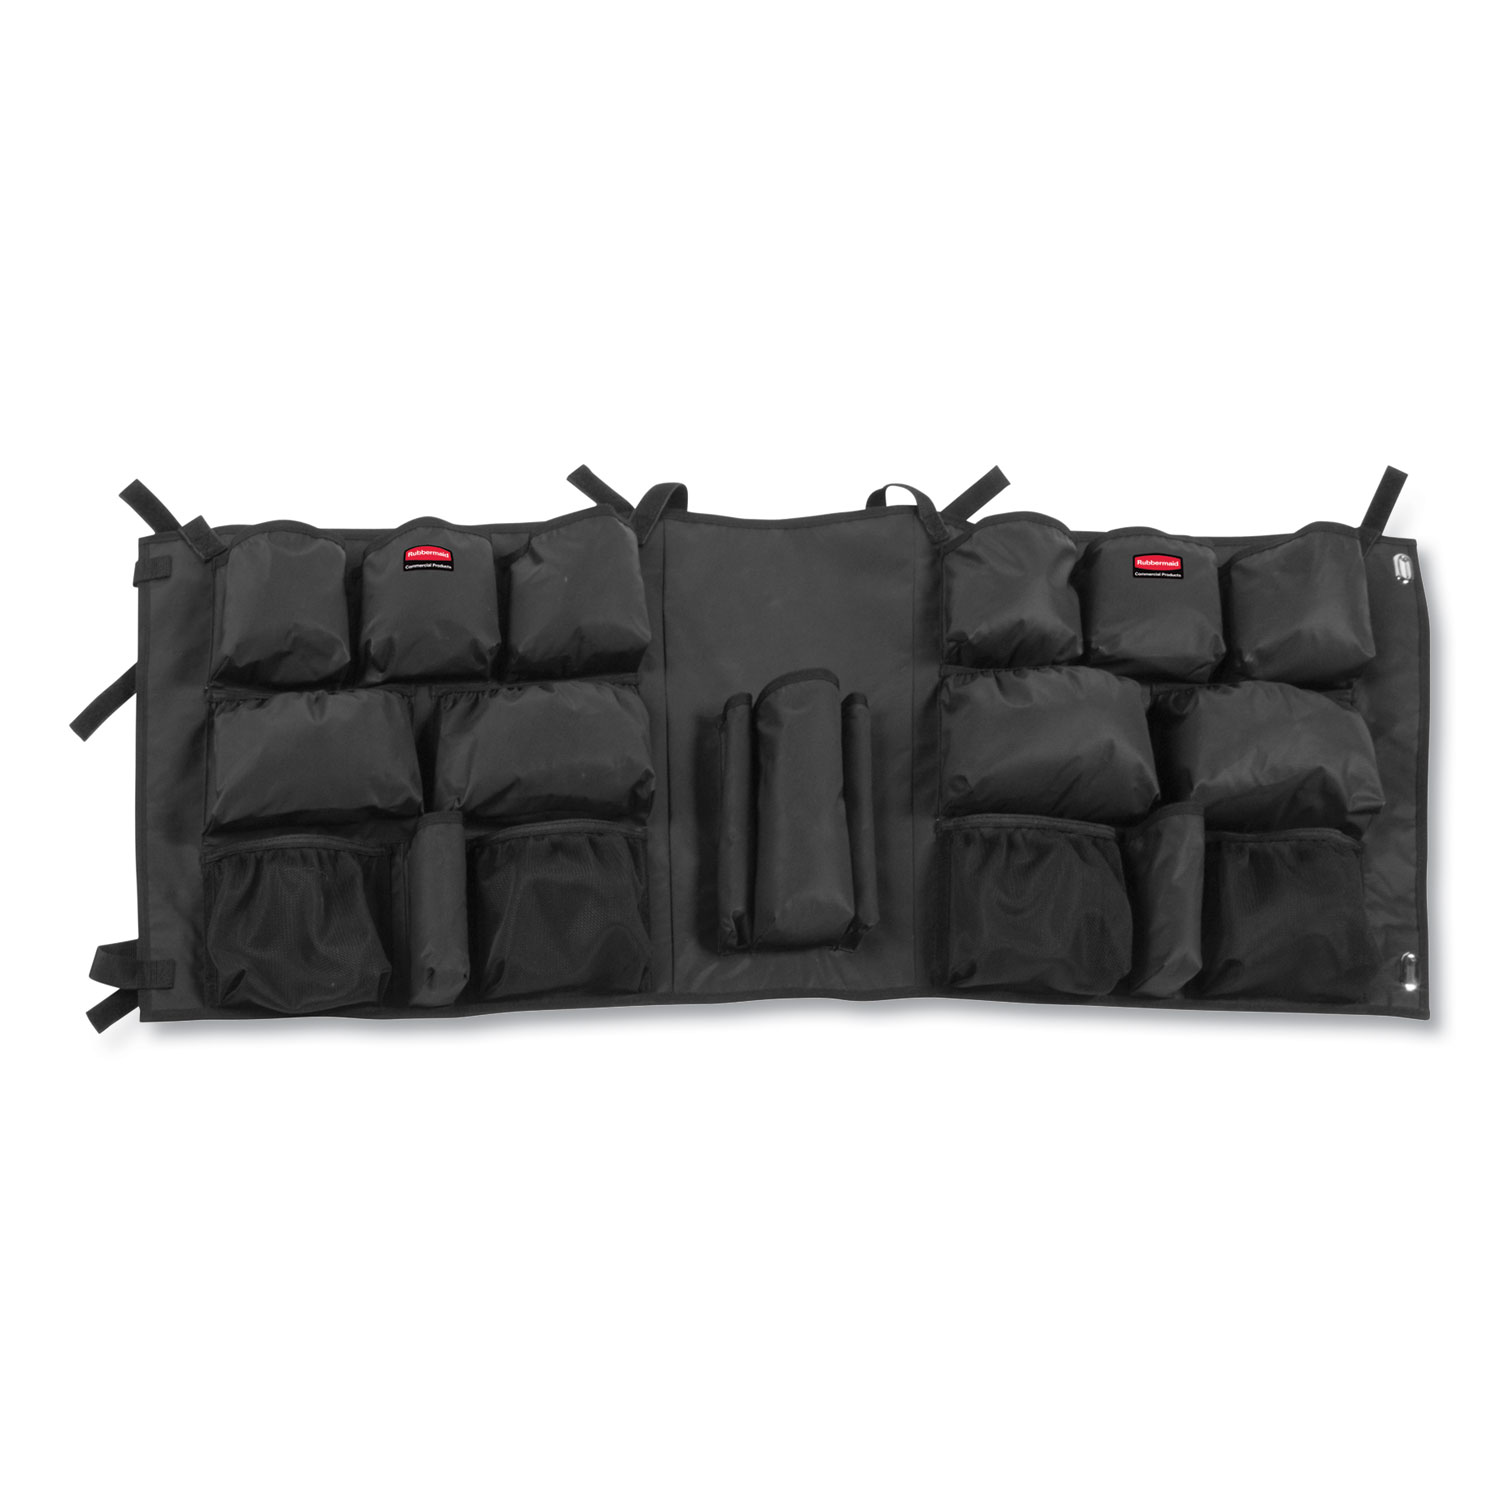  Rubbermaid Commercial 2032939 Slim Jim Caddy Bag, 19 Compartments, 10.25w x 19h, Black (RCP2032939) 